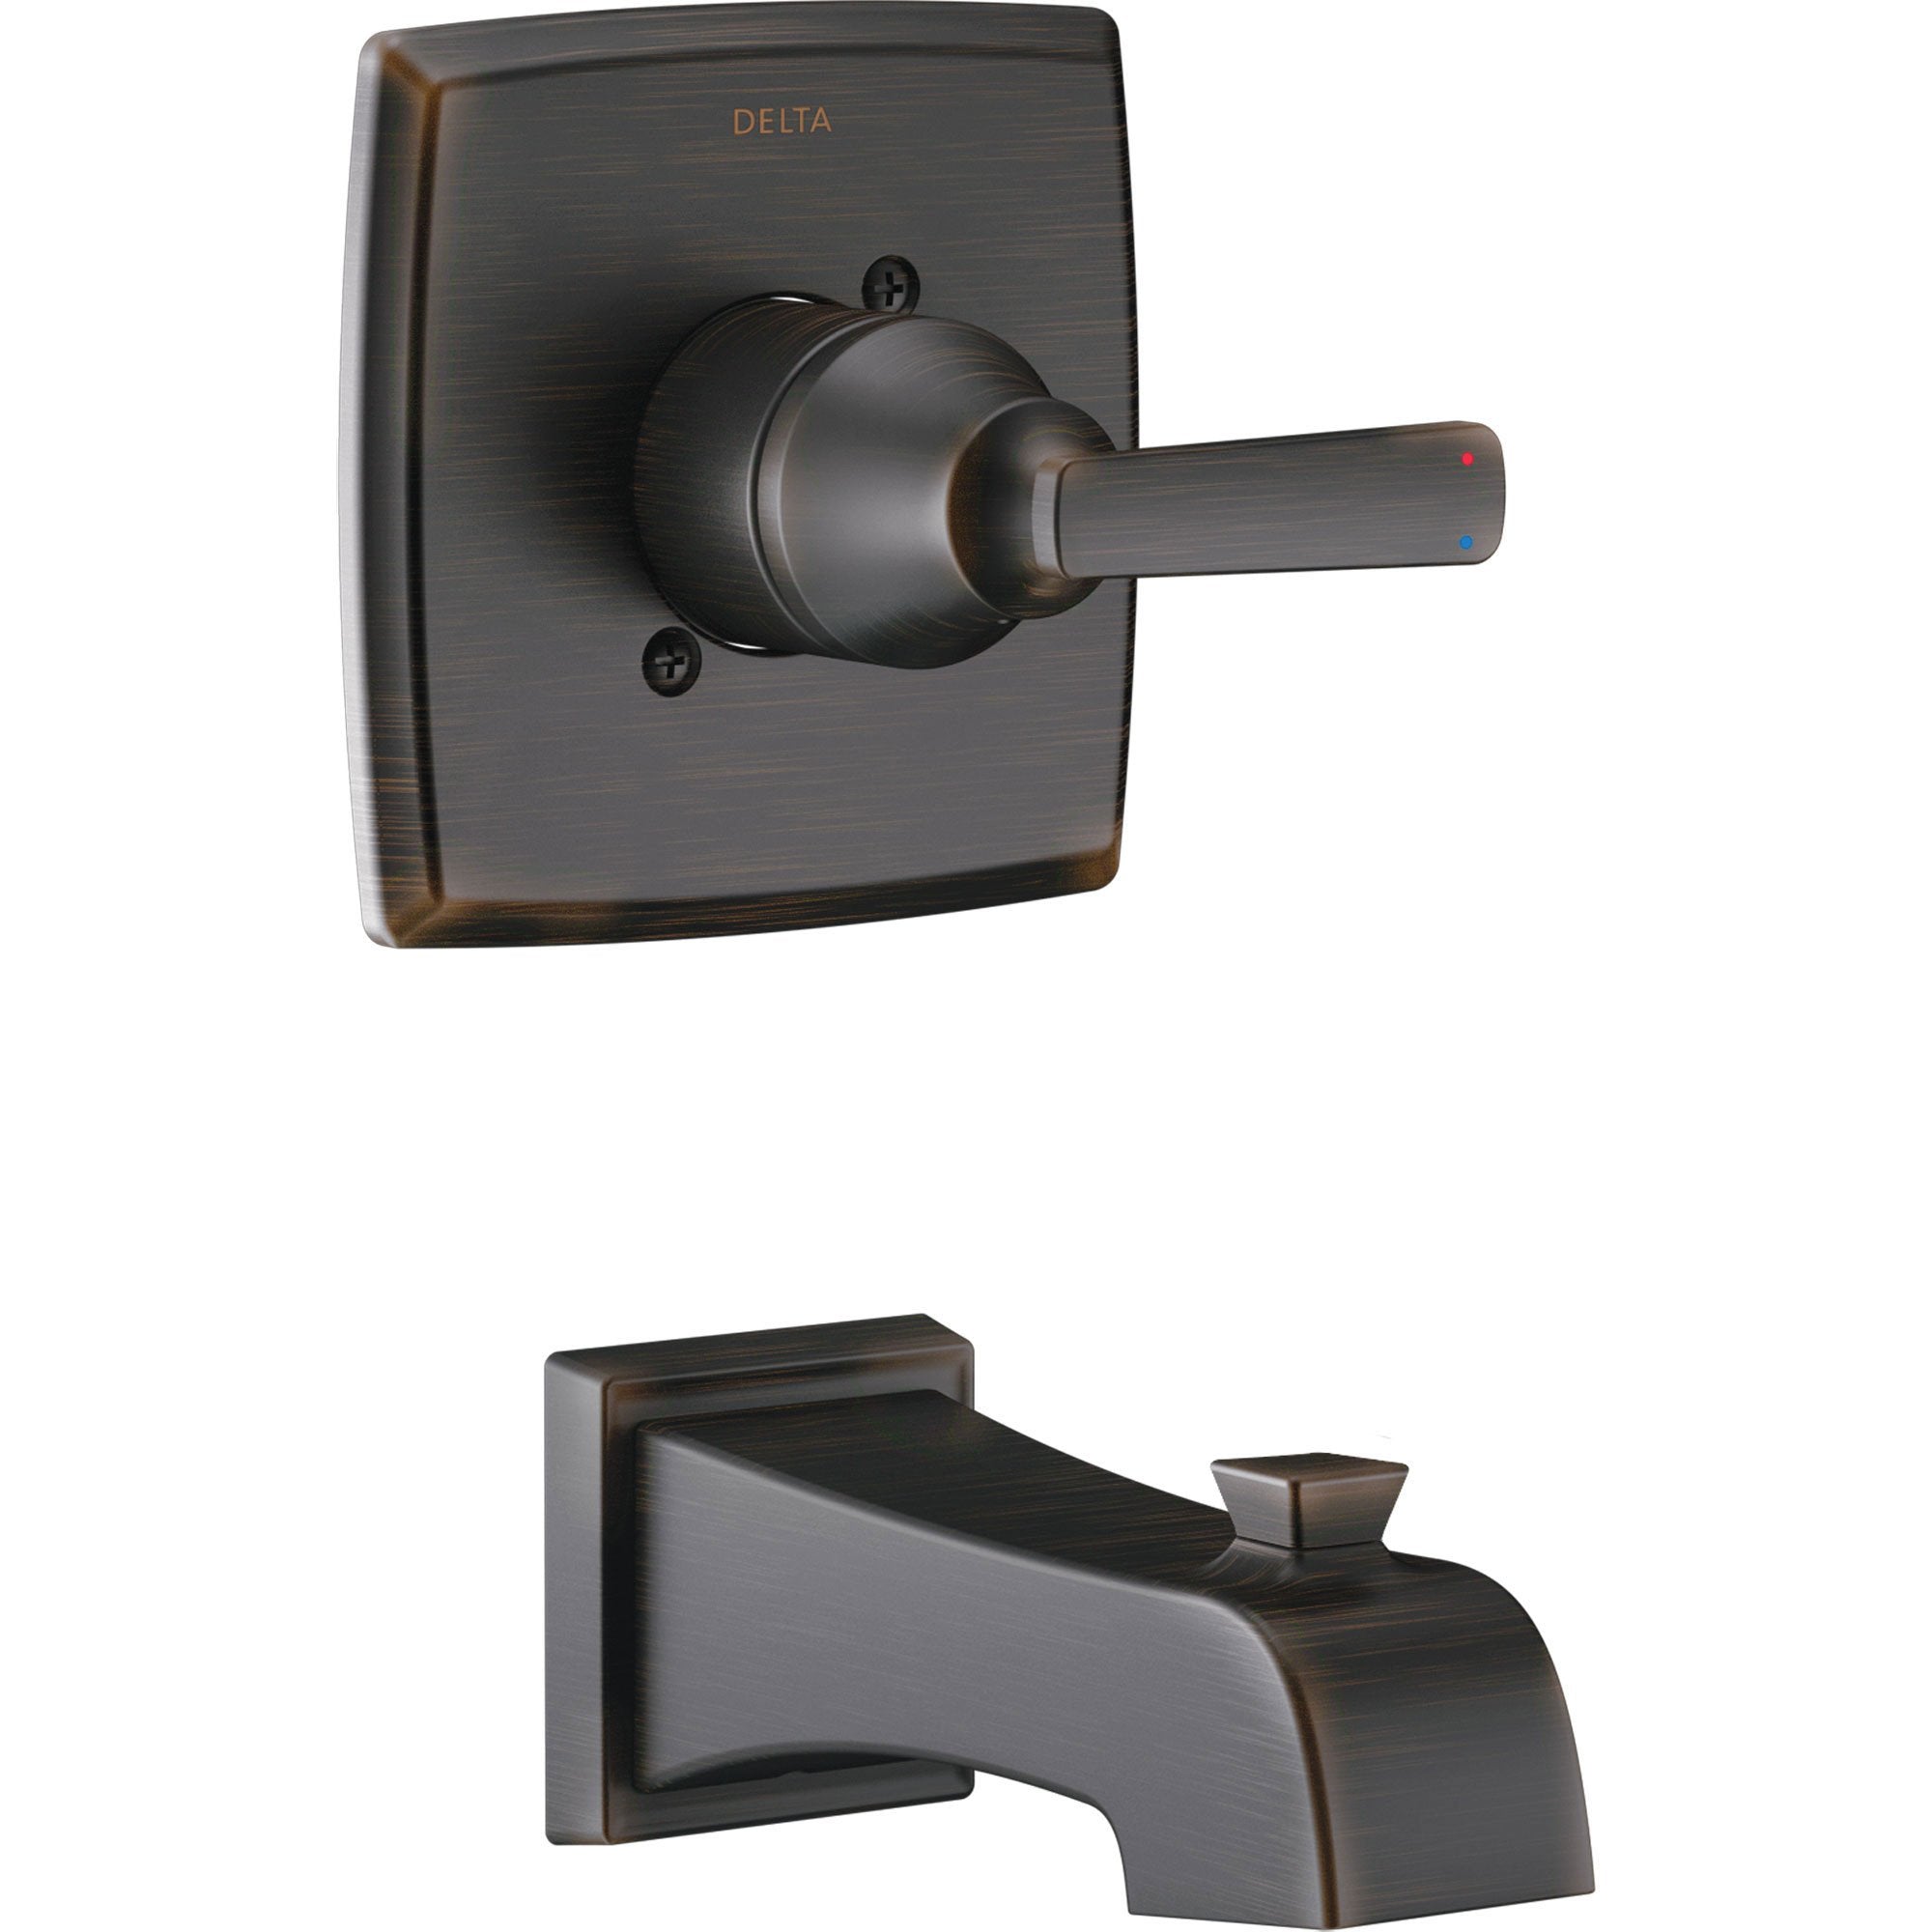 Delta Ashlyn Modern 14 Series Venetian Bronze Finish Single Handle Wall Mounted Tub Only Faucet INCLUDES Rough-in Valve D1238V